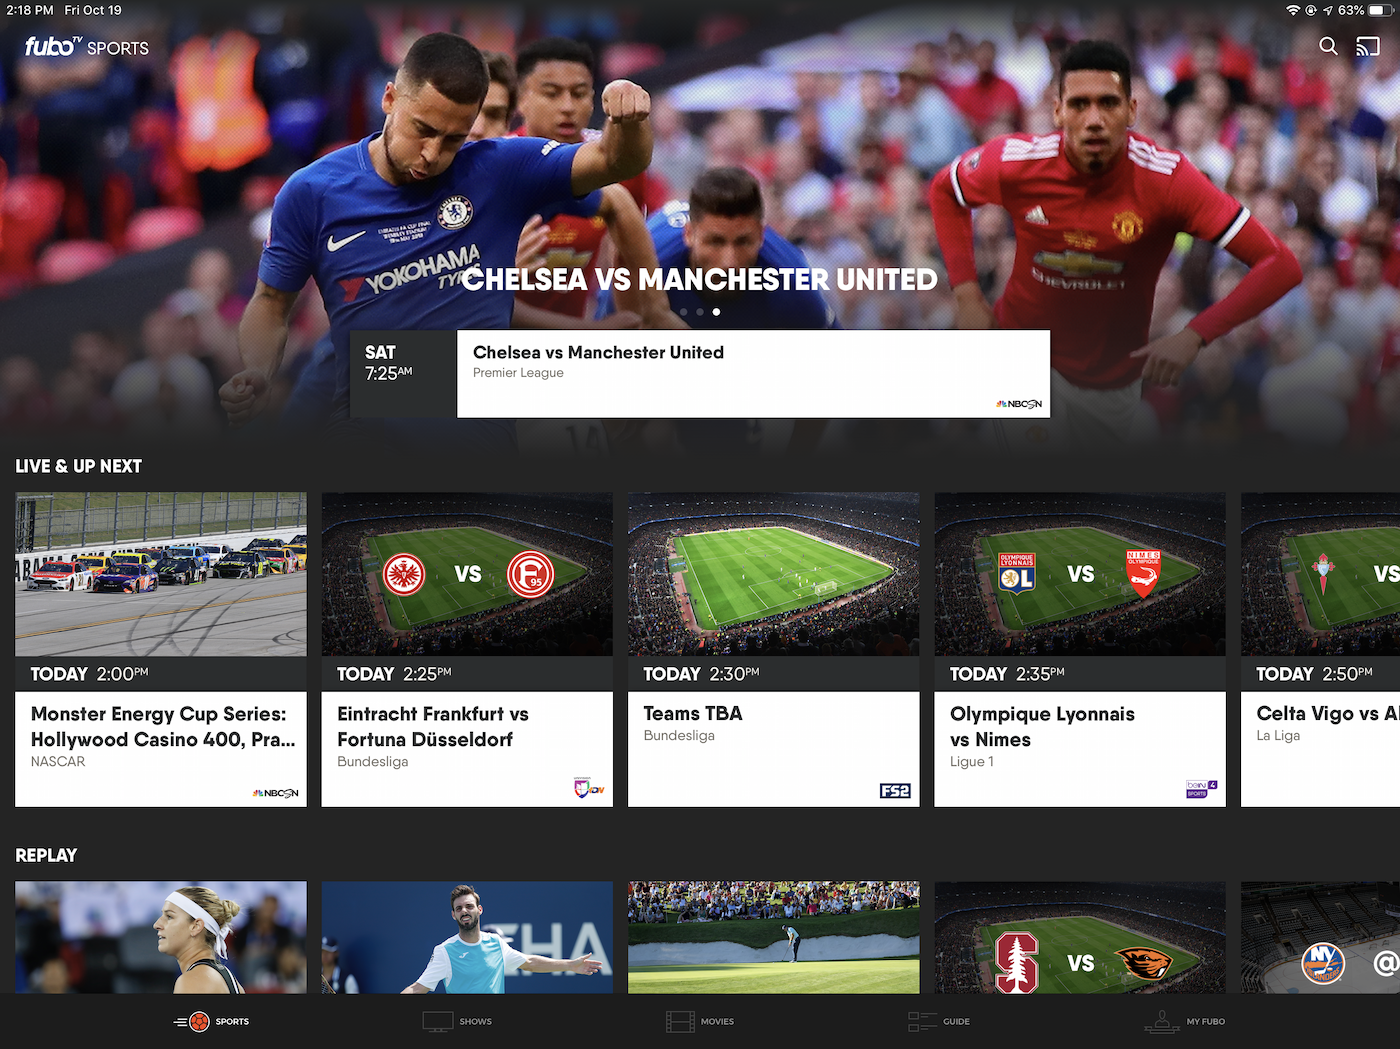 fuboTV review a good cord cutting option for sports fans